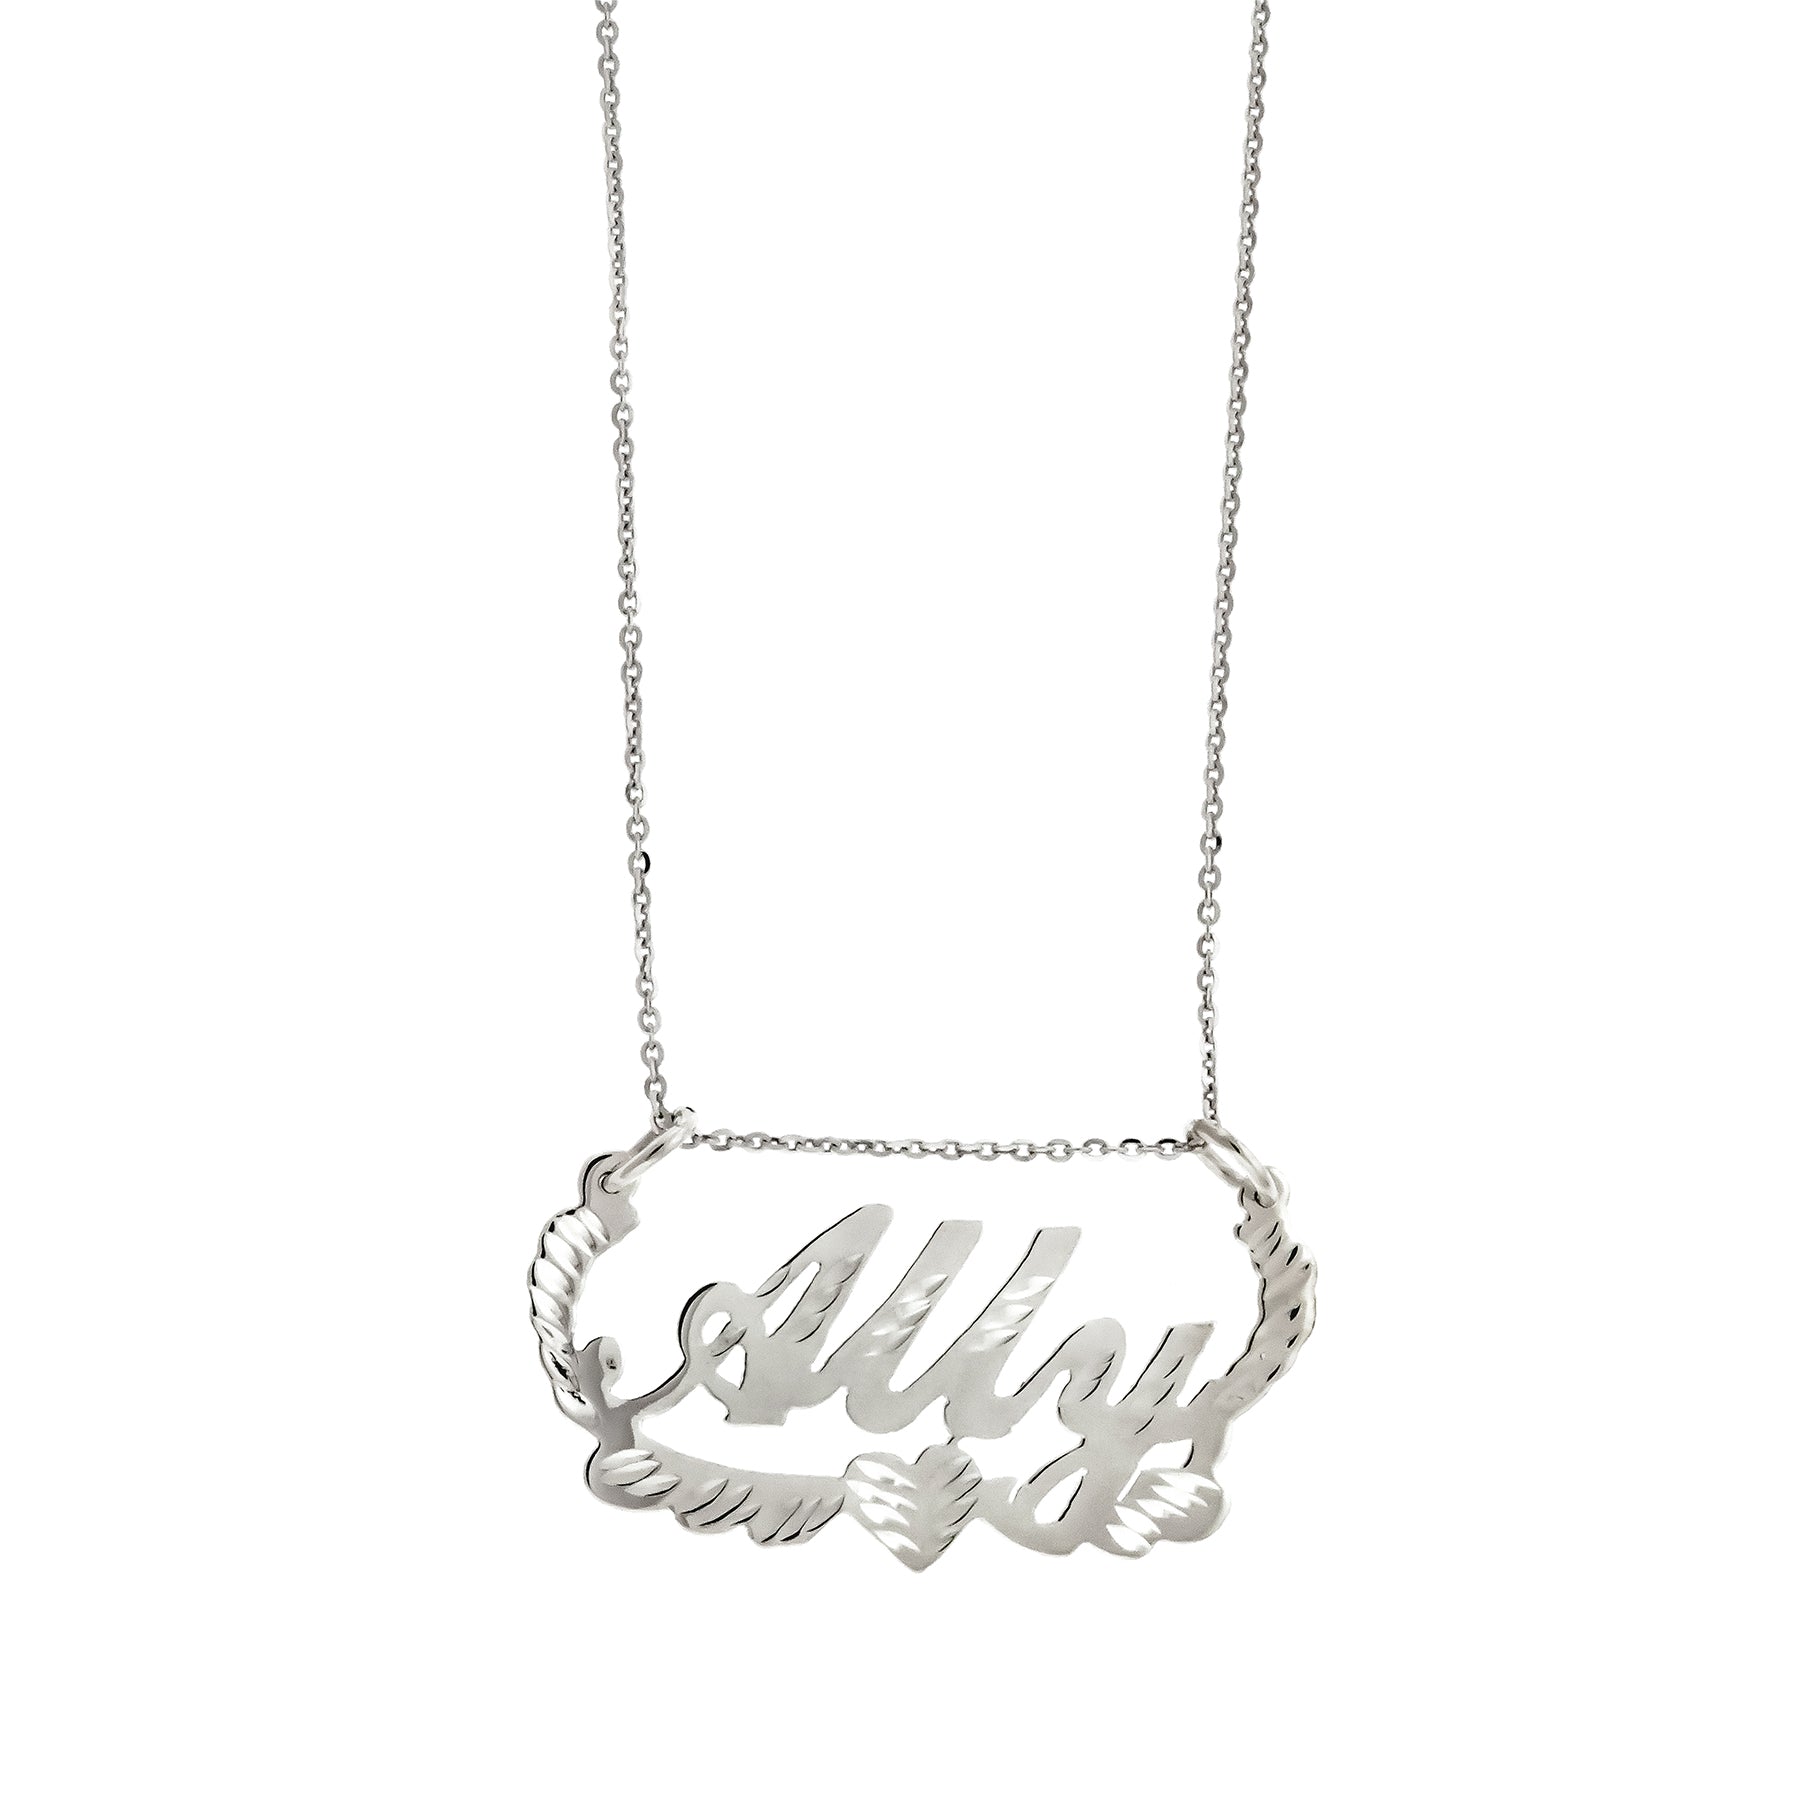 Name Plate Necklace (Lady Gaga 